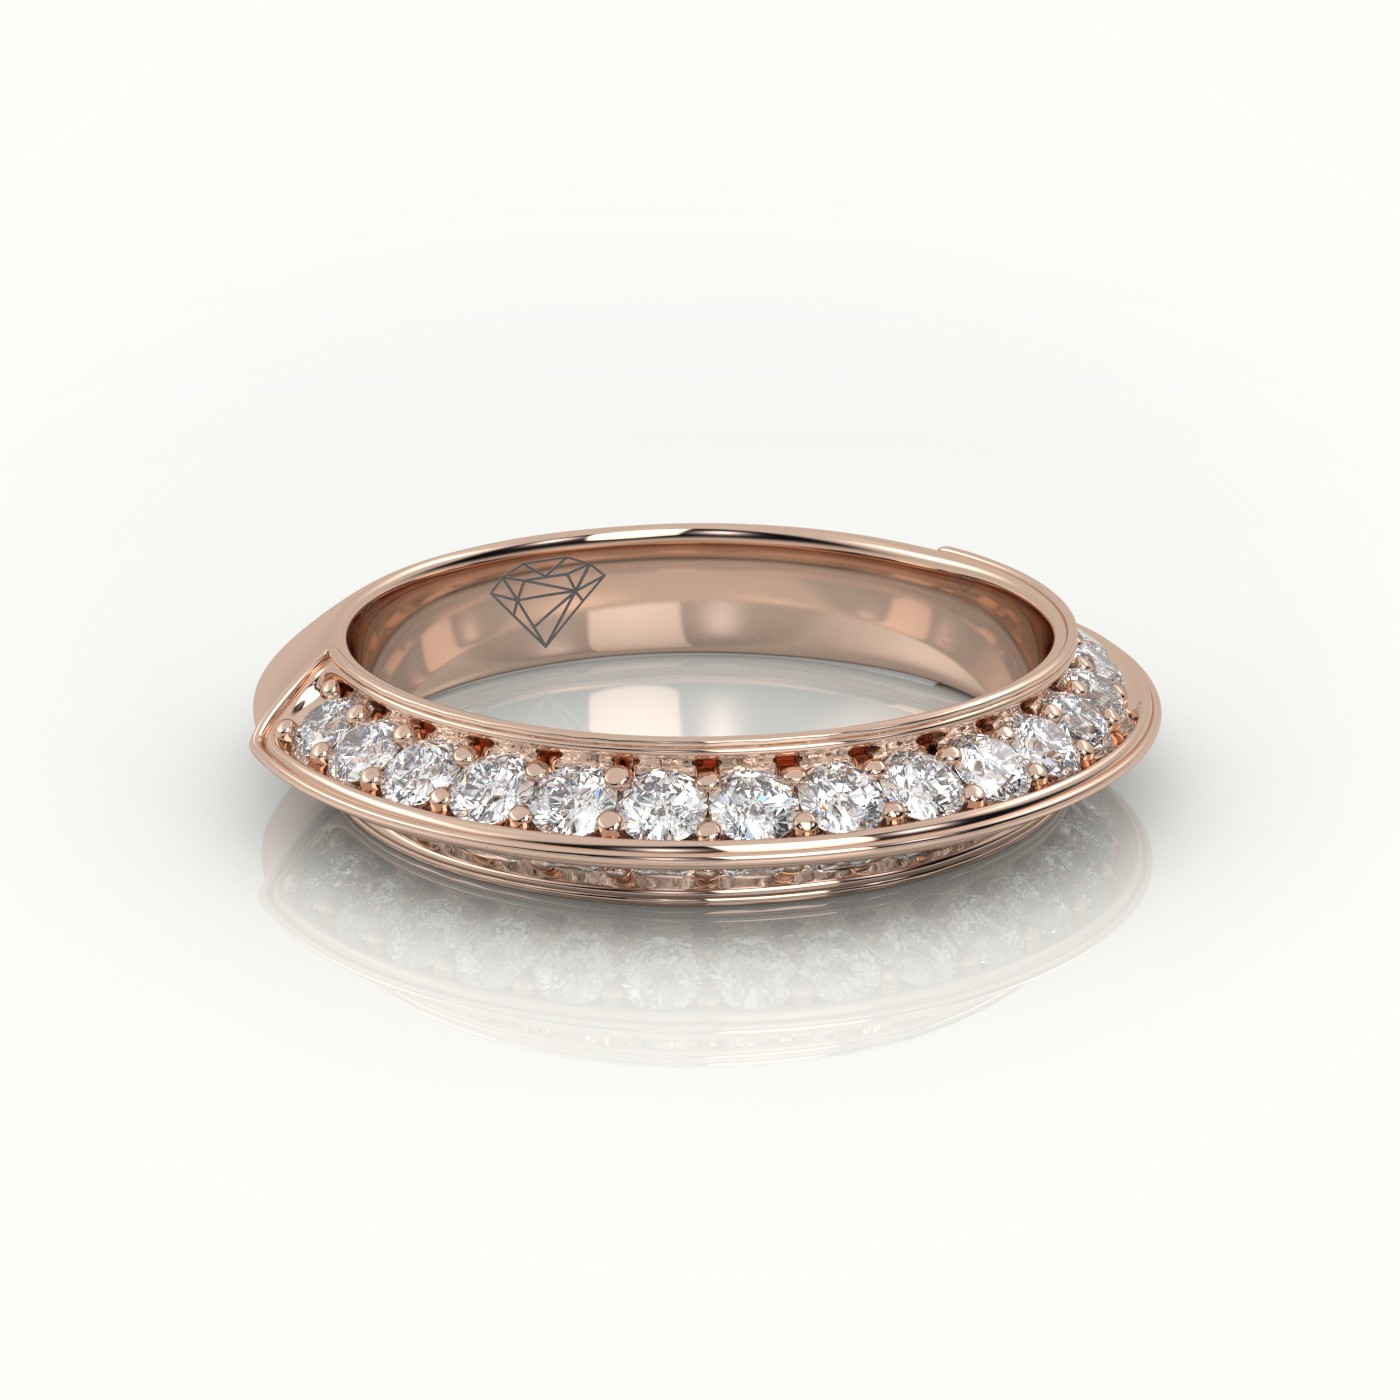 18k rose gold  round cut diamond double channel setting eternity wedding band Photos & images